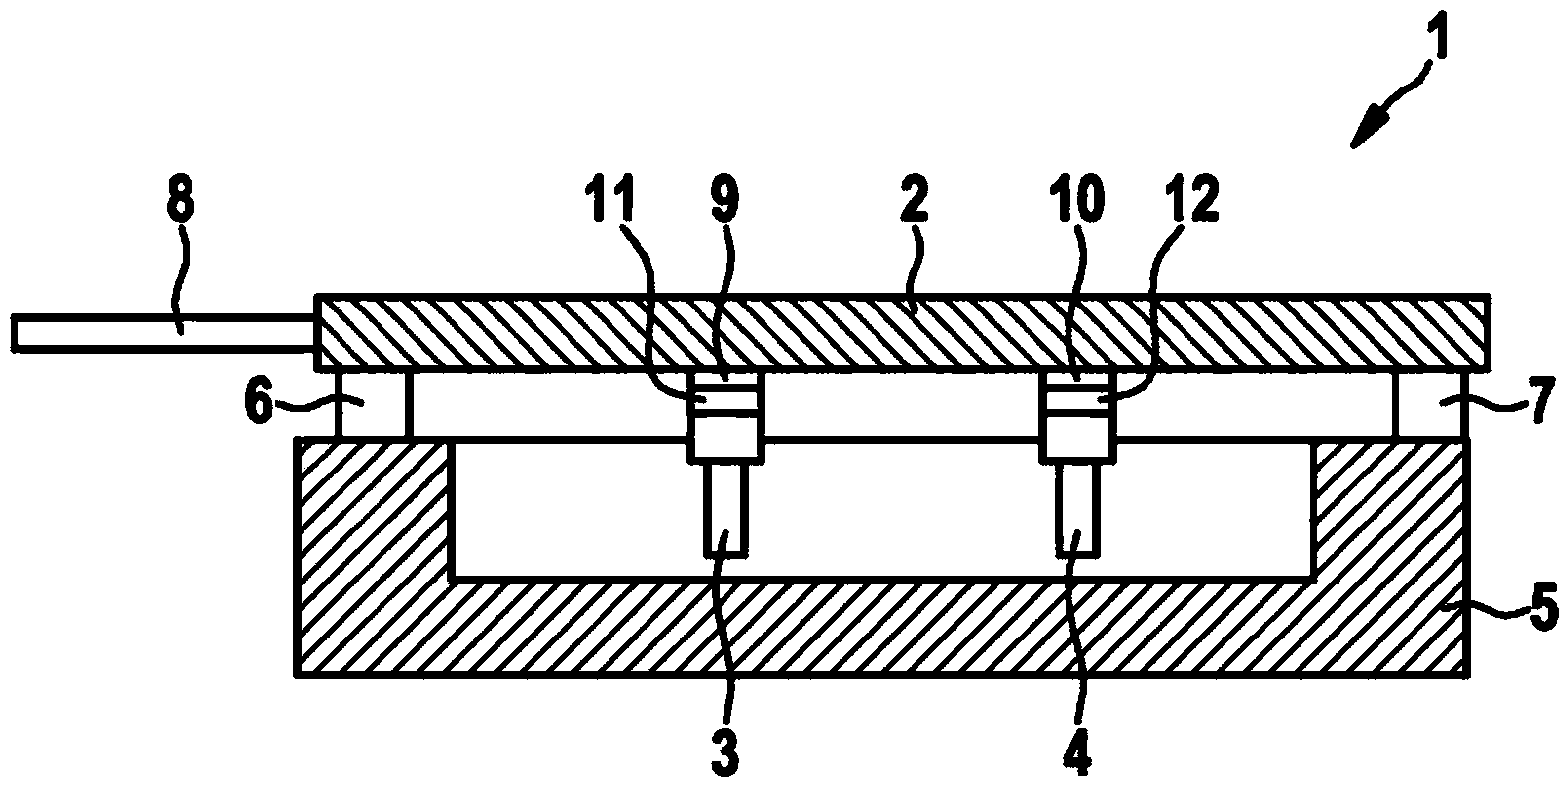 Arrangement with a fuel distributer and multiple fuel injection valves